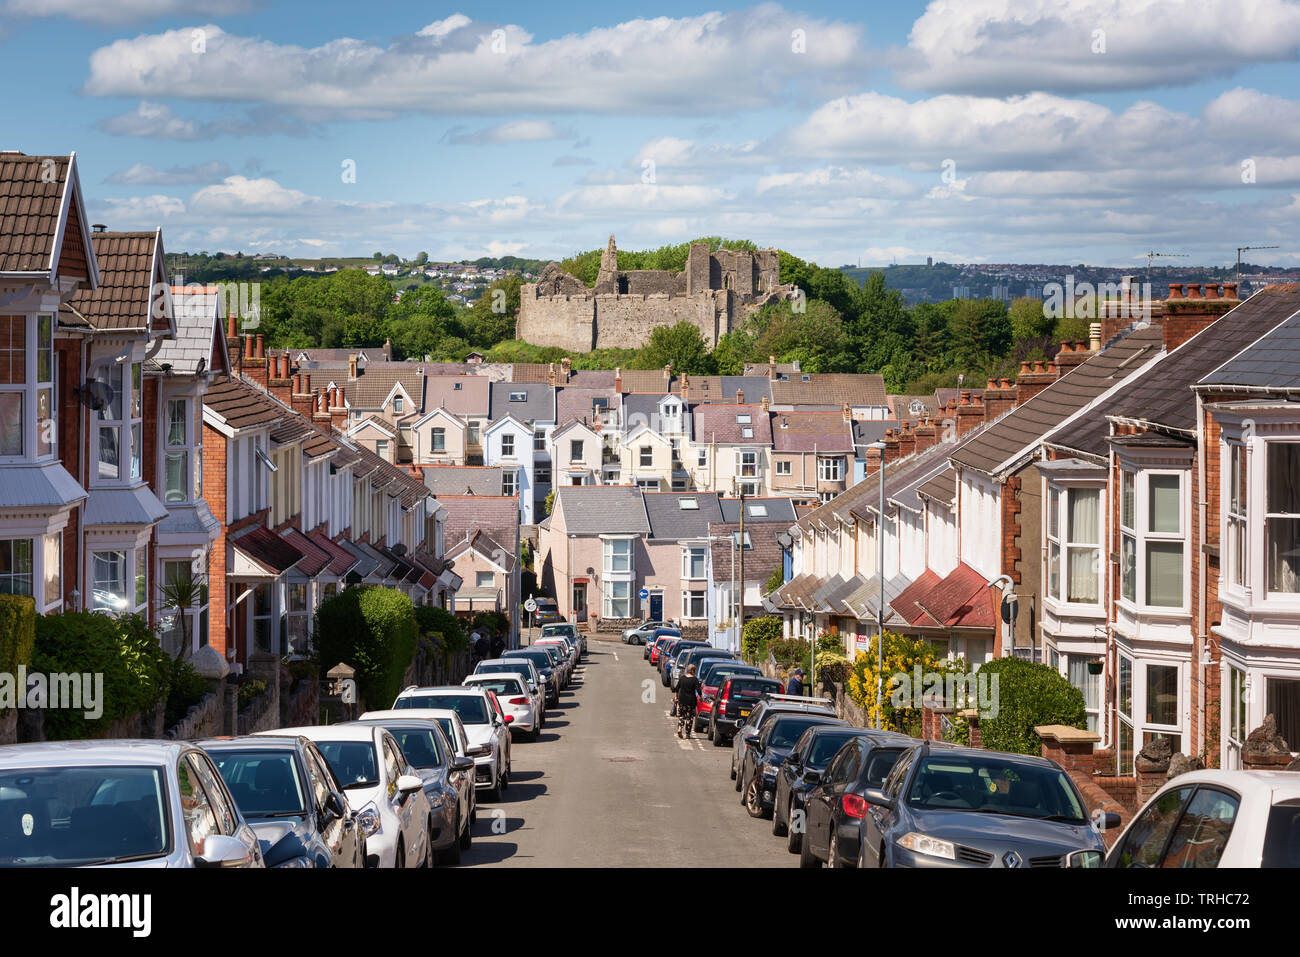 Oystermouth Castle, Wales, UK Stock Photo